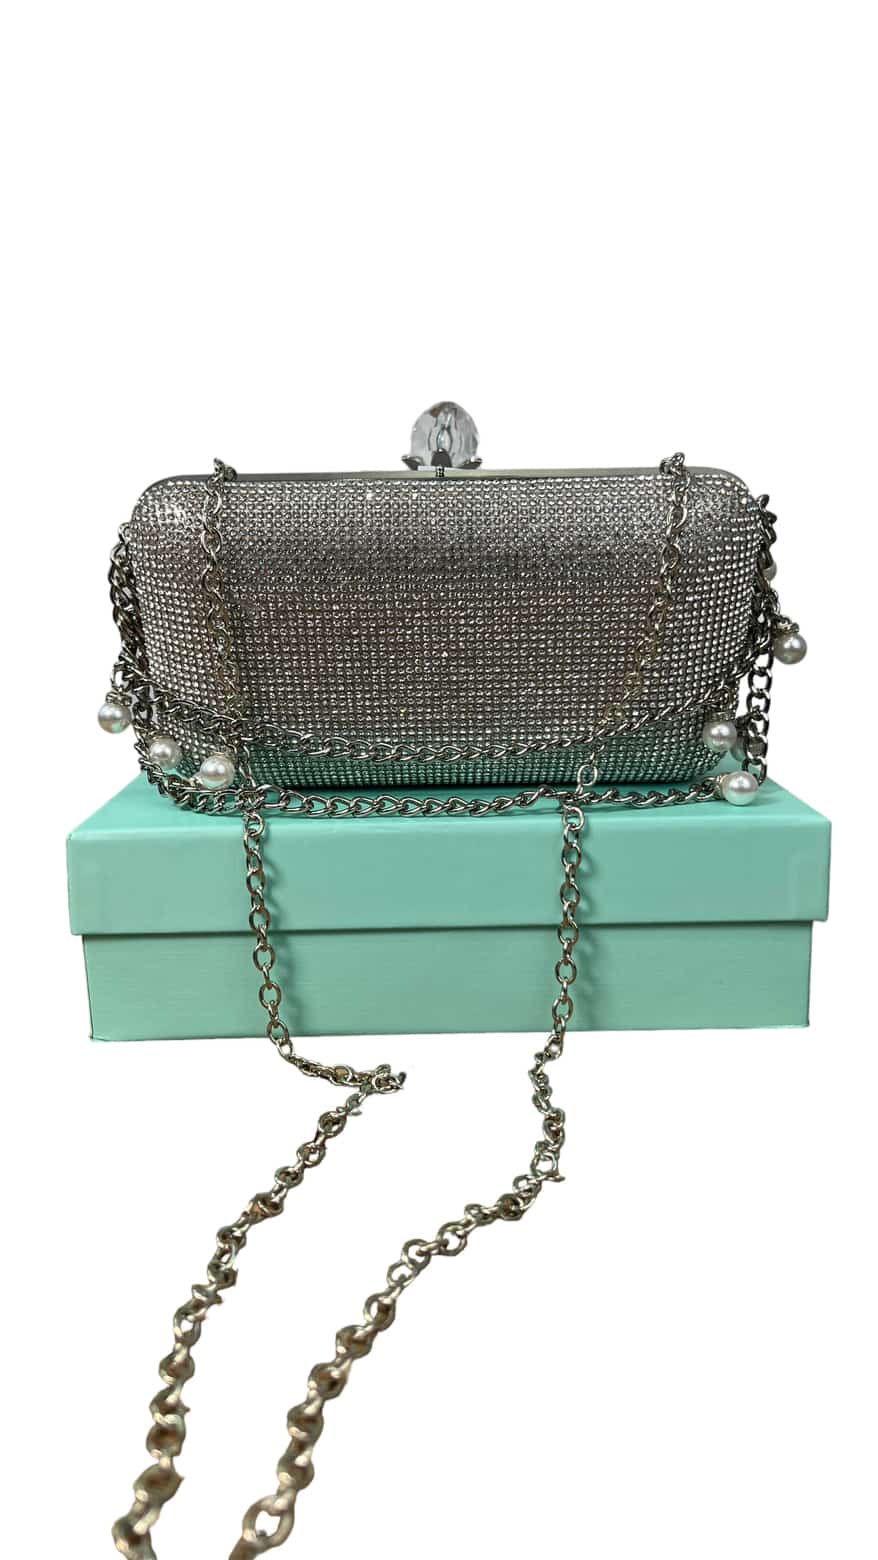 CHRISBELLA SILVER DOUBLE-HANDLE PEARL EMBELLISHED CLUTCH PURSE